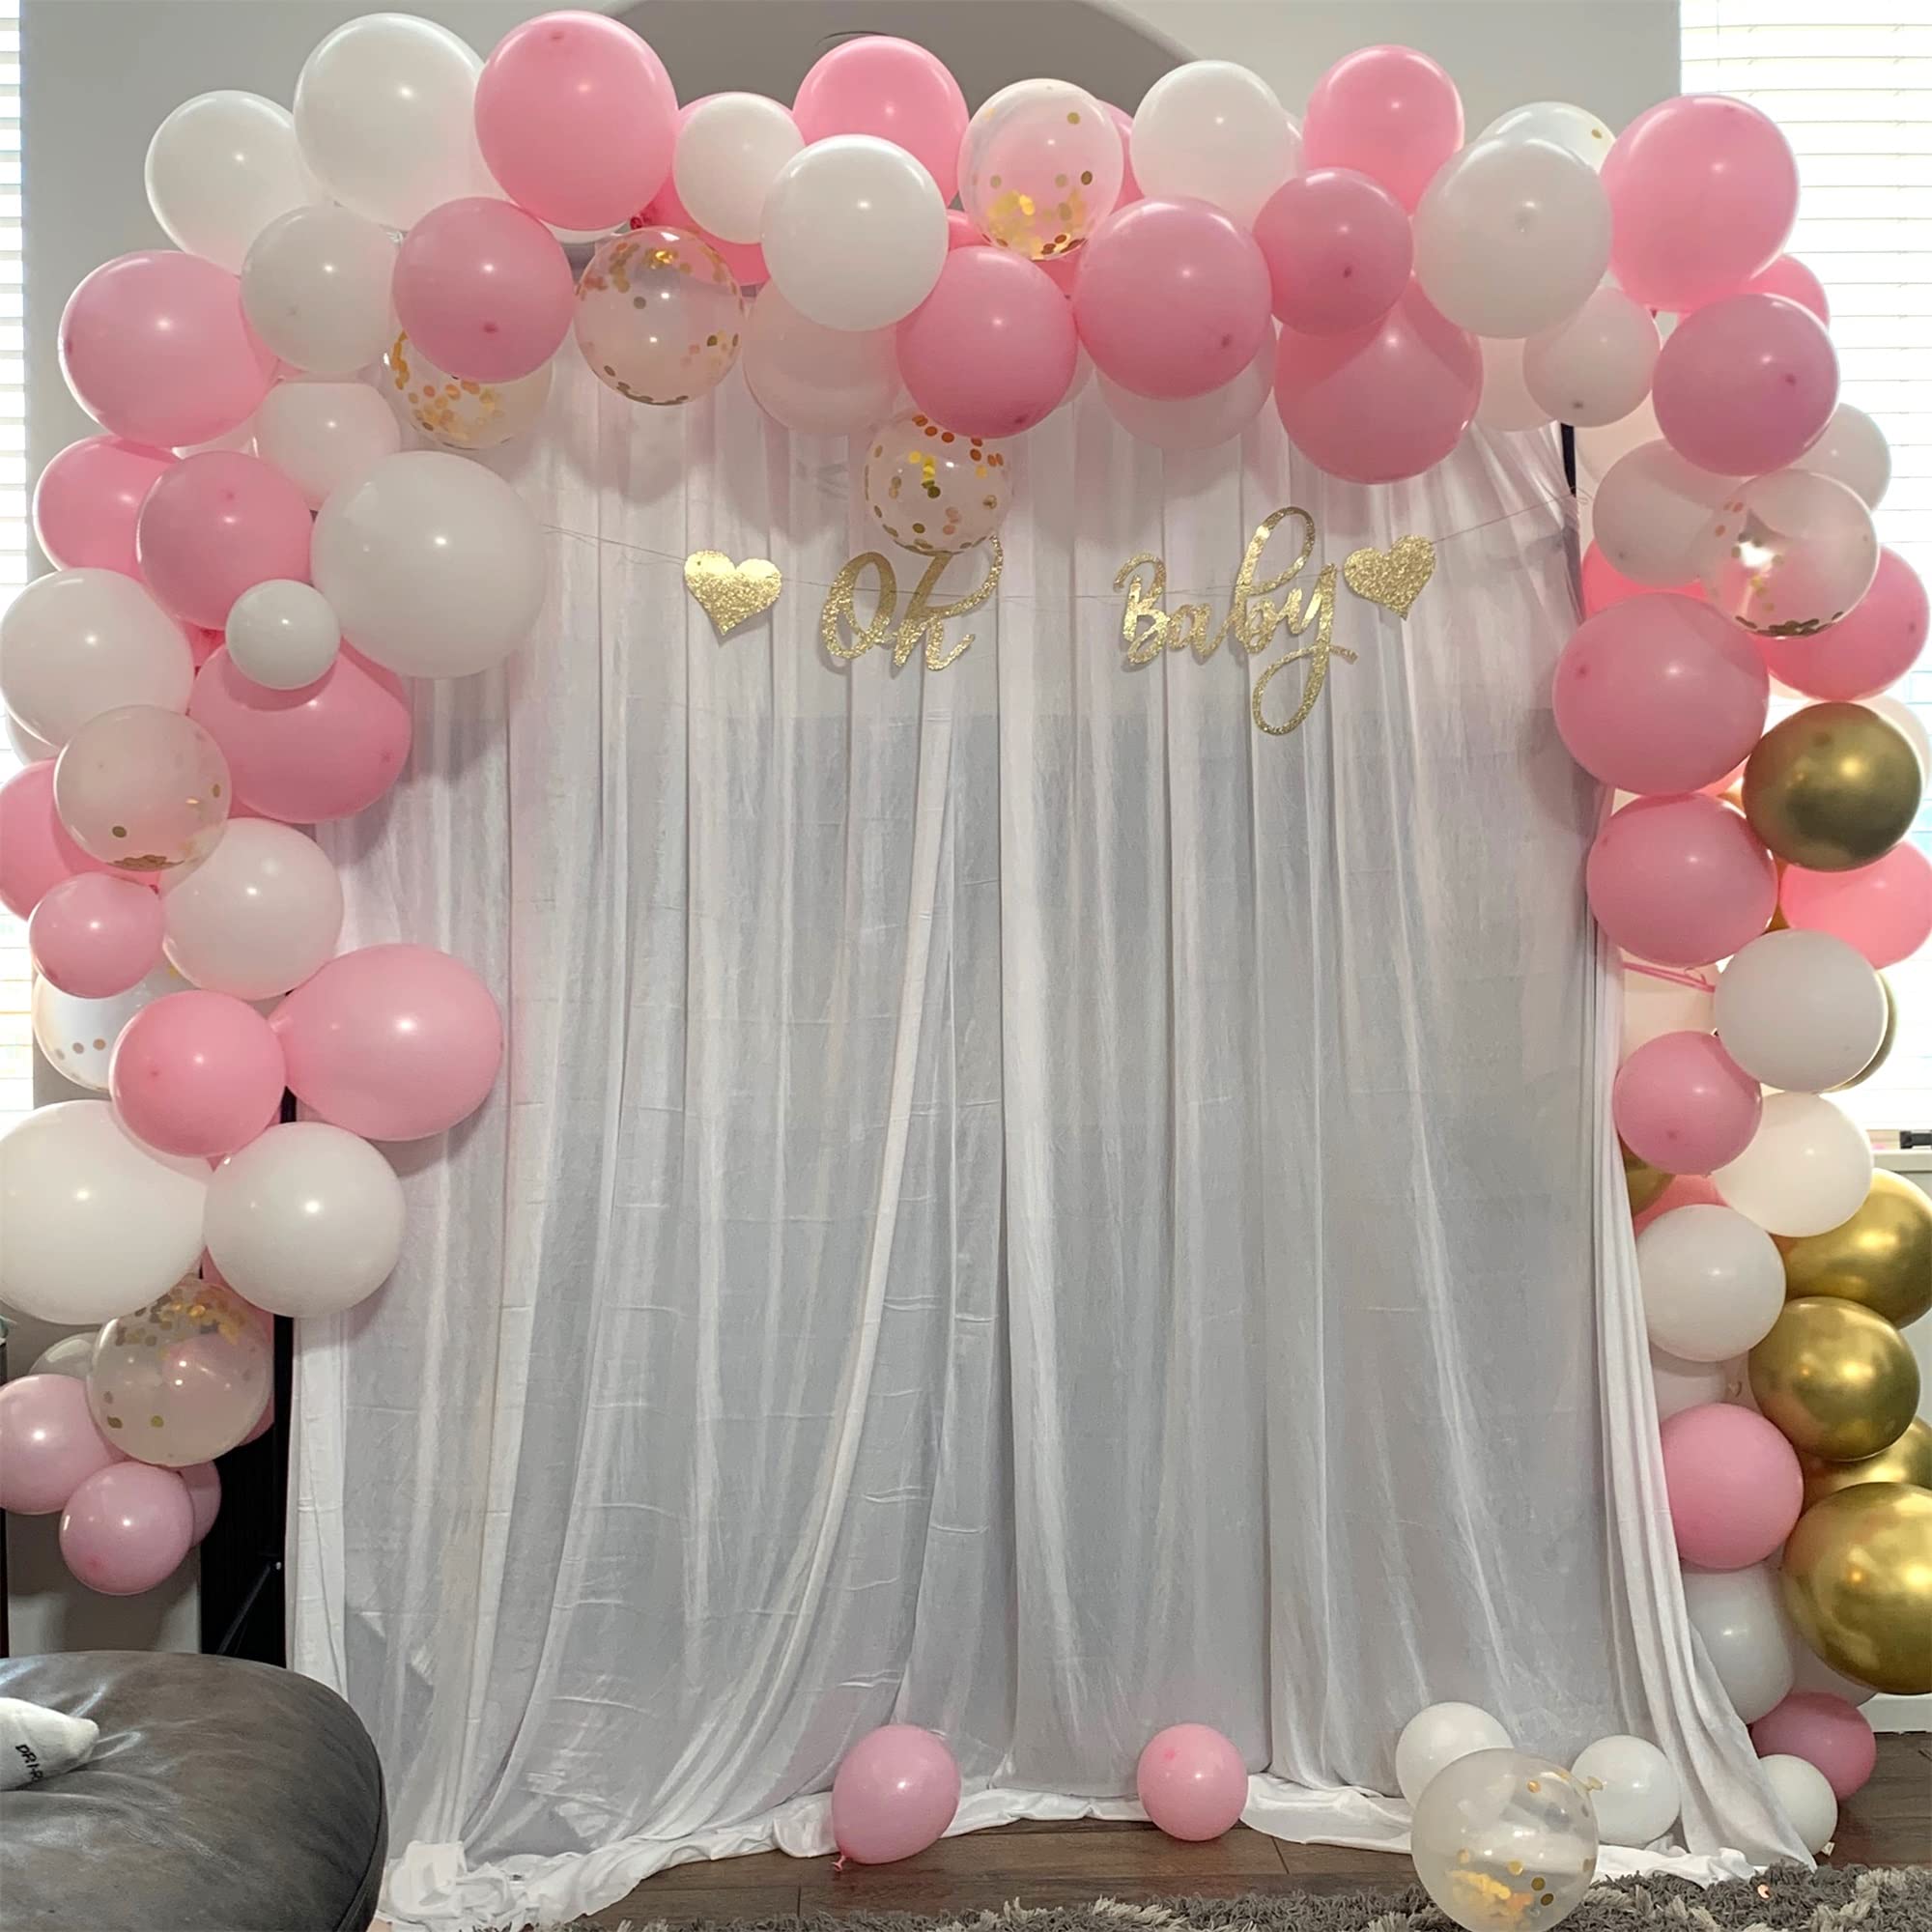 Balloons Pink White and Gold, 12 Inch Pastel Pink Pearl White Metallic Chrome Gold Confetti Latex Balloons, Baby Pink Gold Party Balloons Set for Girls Baby Shower Birthday Princess Party Decorations